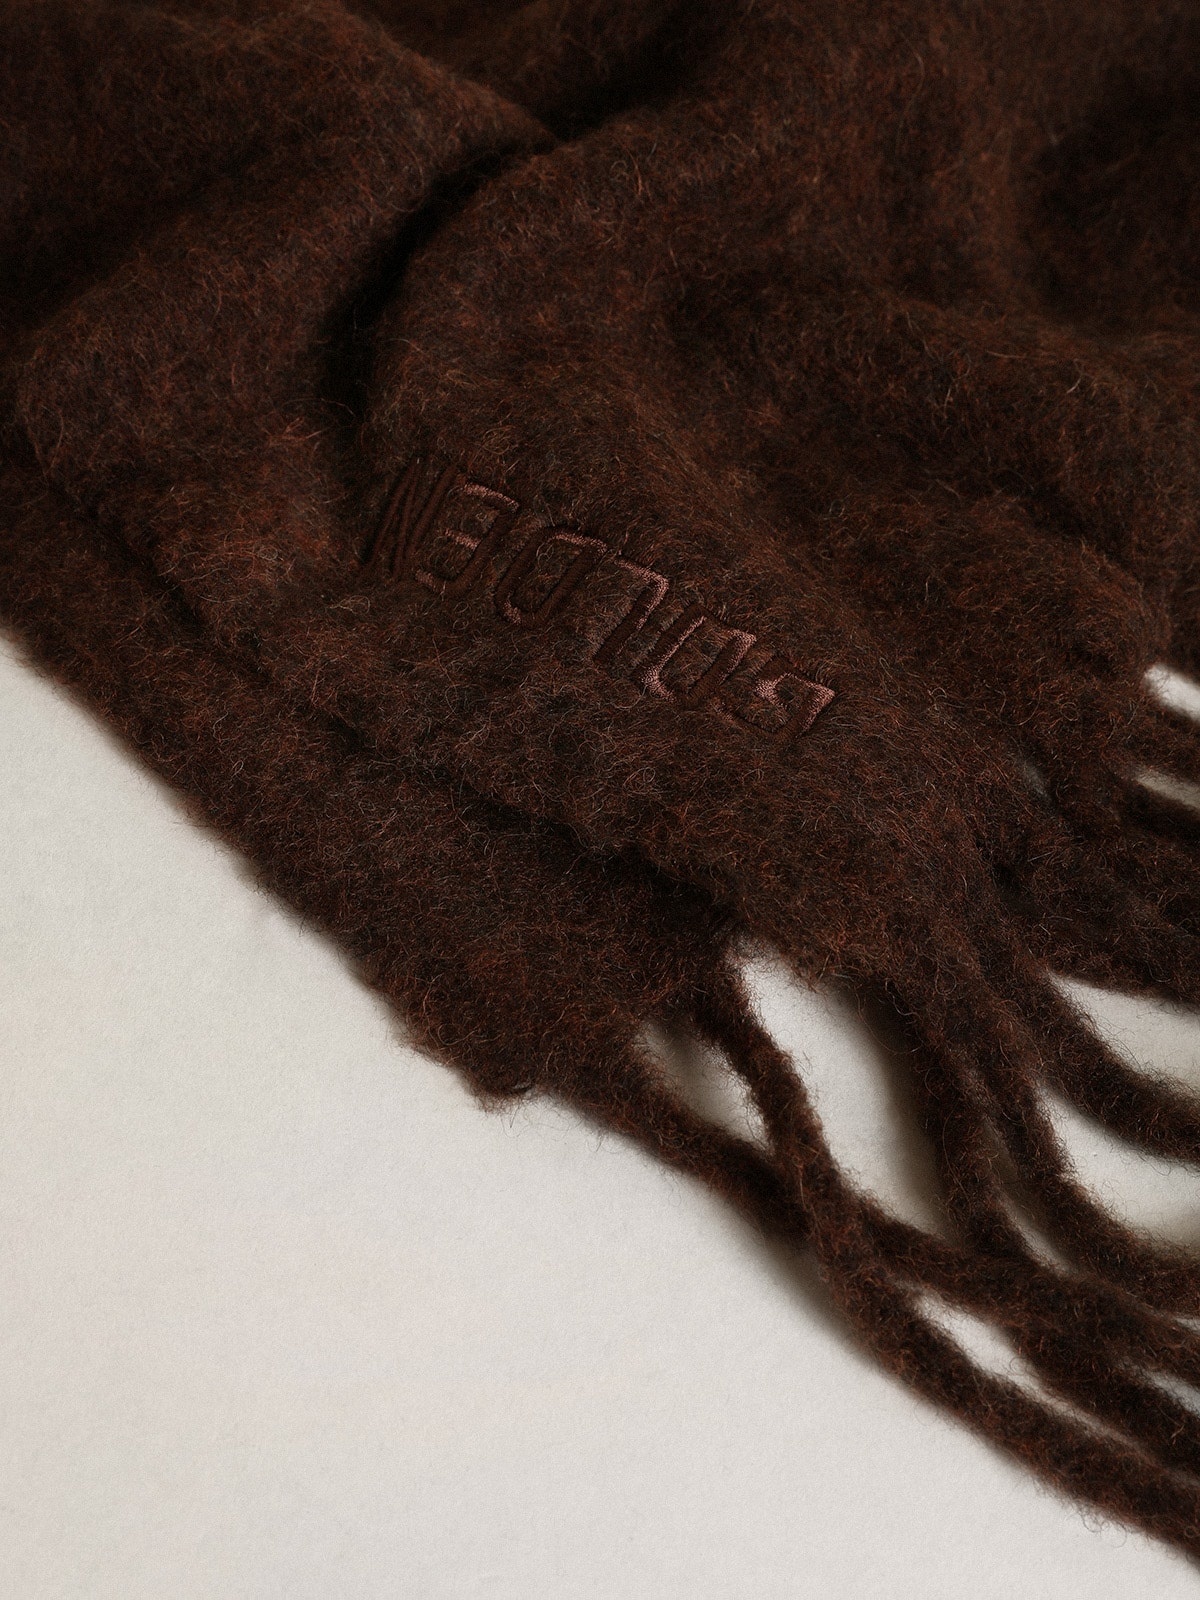 Coffee-colored wool scarf with fringe and ‘Golden’ lettering - 2